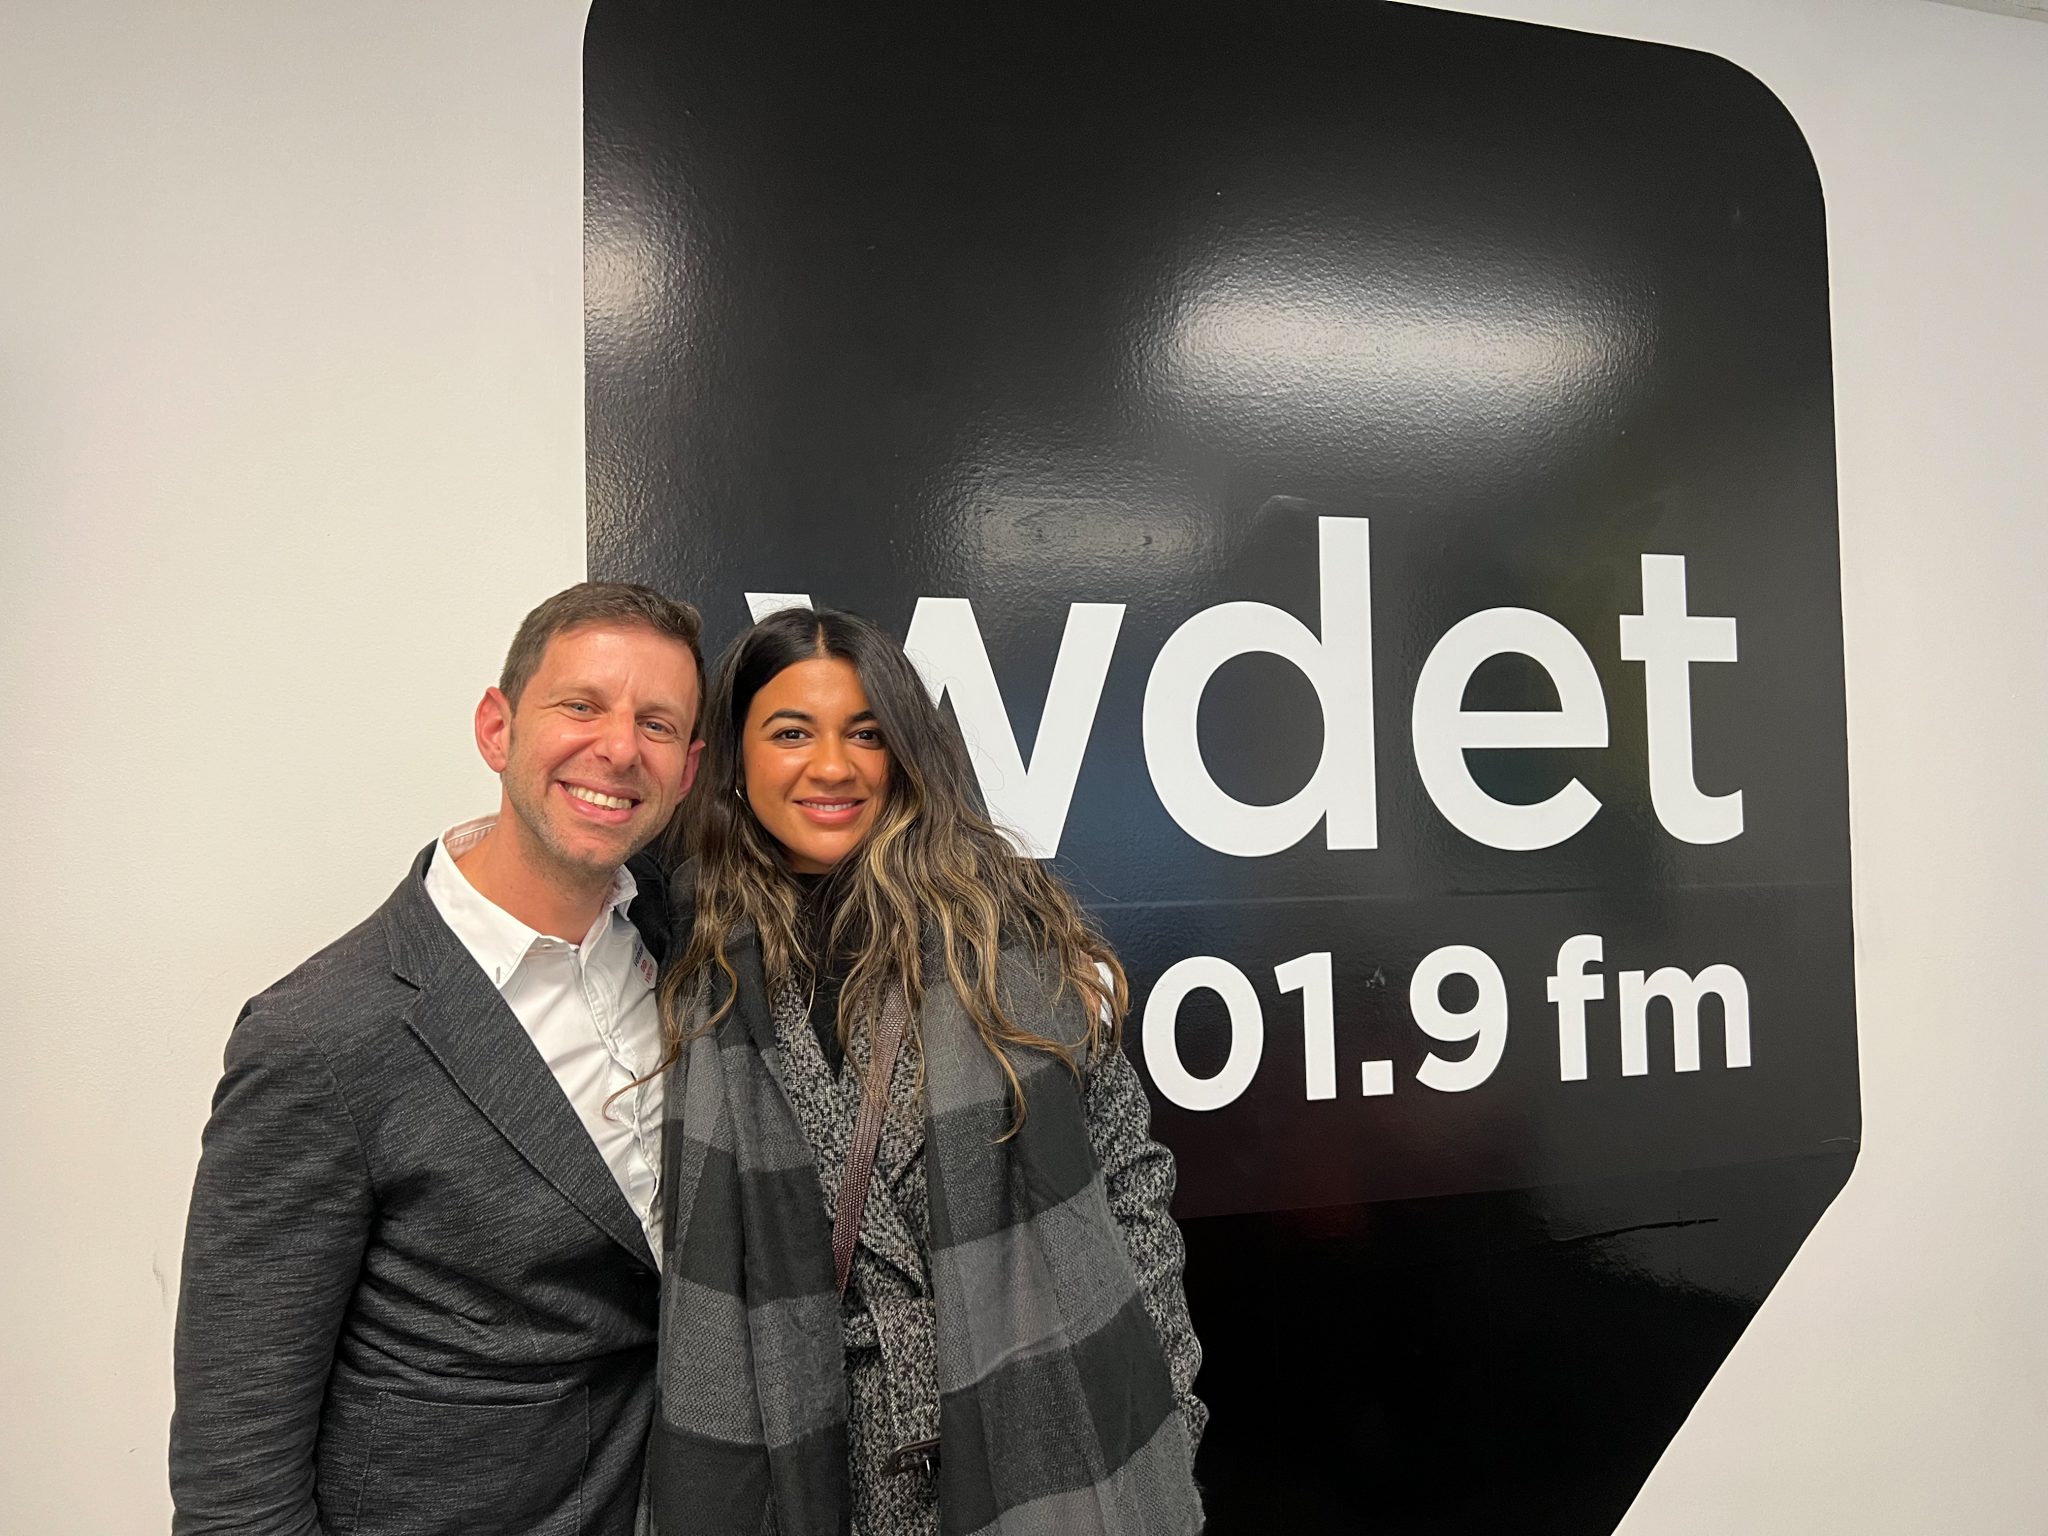 Yuval Sharon and Amina Edris smile in front of WDET's logo at our studios in November 2022